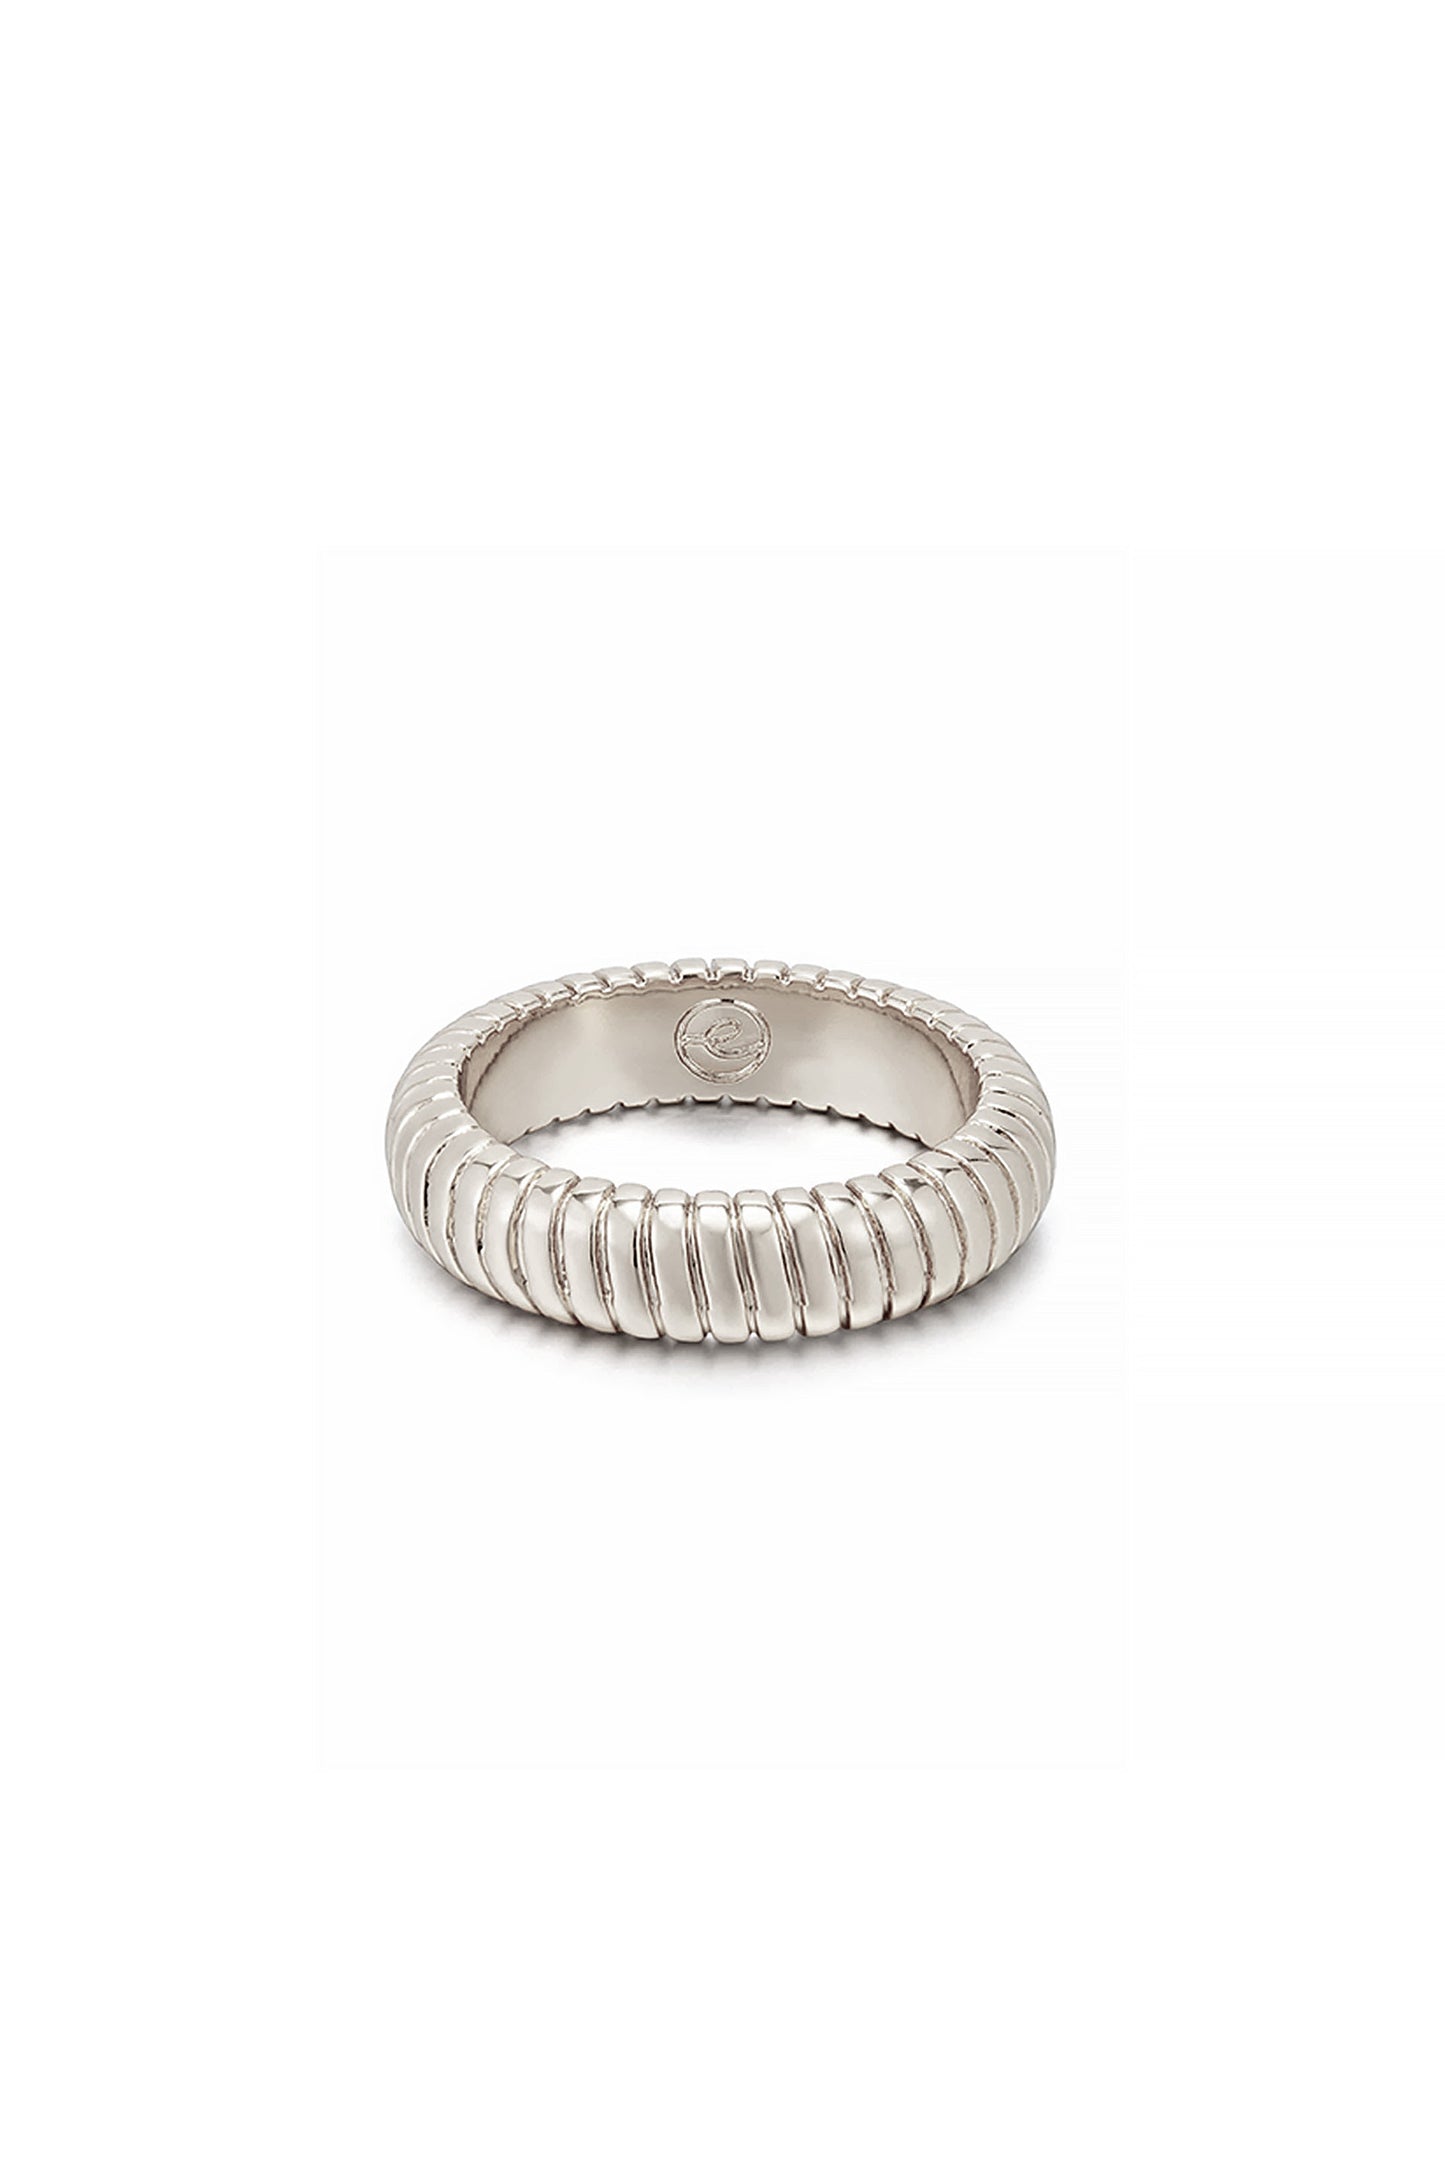 Your Essential 18k Gold Plated Twisted Flex Ring in rhodium